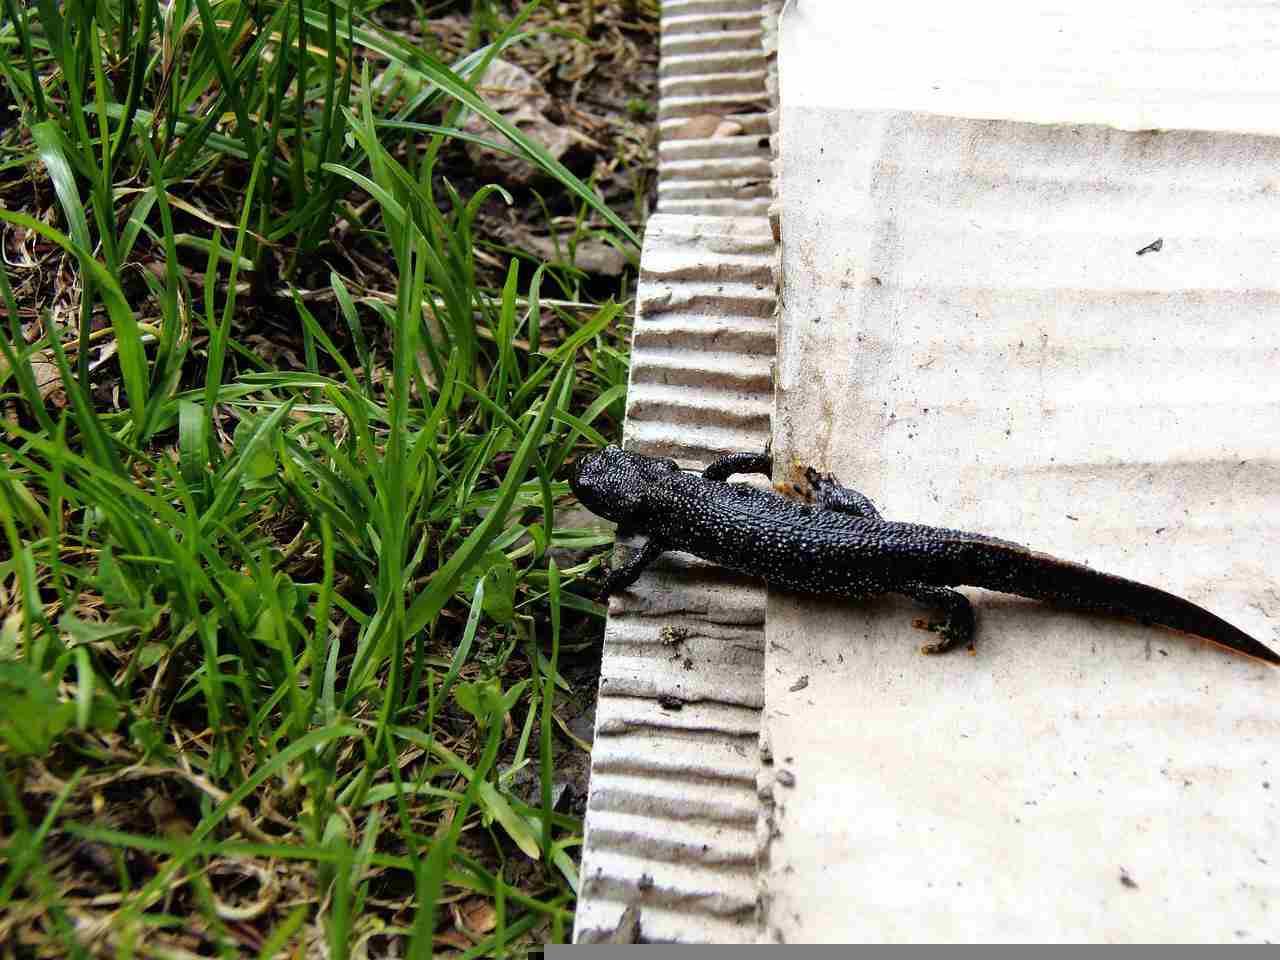 Fun Crested Newt Facts for Children